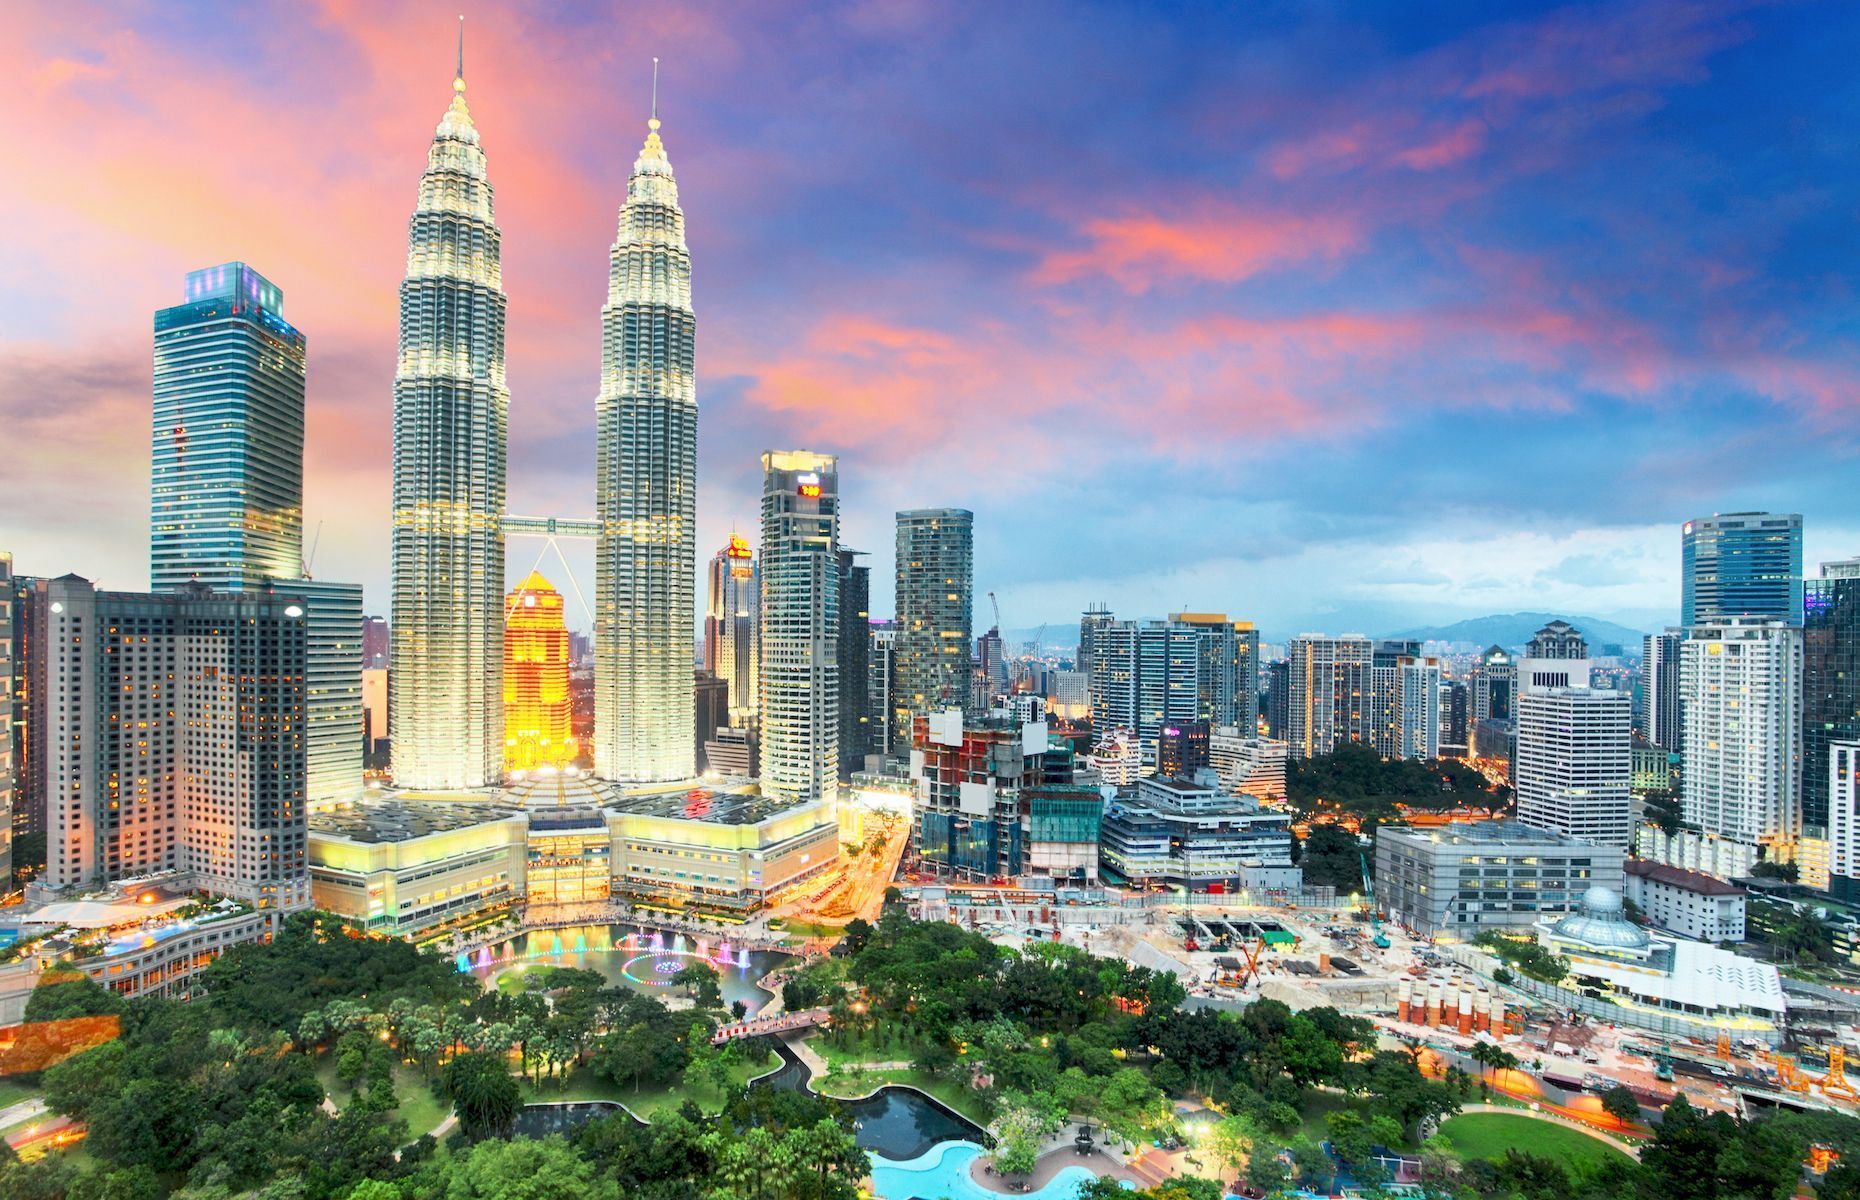 <p>Capital of Malaysia, <a href="https://ca.hotels.com/go/malaysia/best-things-to-do-kuala-lumpur" class="atom_link atom_valid" rel="noreferrer noopener">Kuala Lumpur</a> is a vibrant, cosmopolitan metropolis that combines tradition and modernity. Among its finest attractions are the famous Petronas Twin Towers, offering exceptional panoramic views from an observation deck. Also be sure to visit Merdeka Square’s majestic colonial buildings, Sultan Abdul Samad’s palace, and the city’s night markets while in Kuala Lumpur.</p>